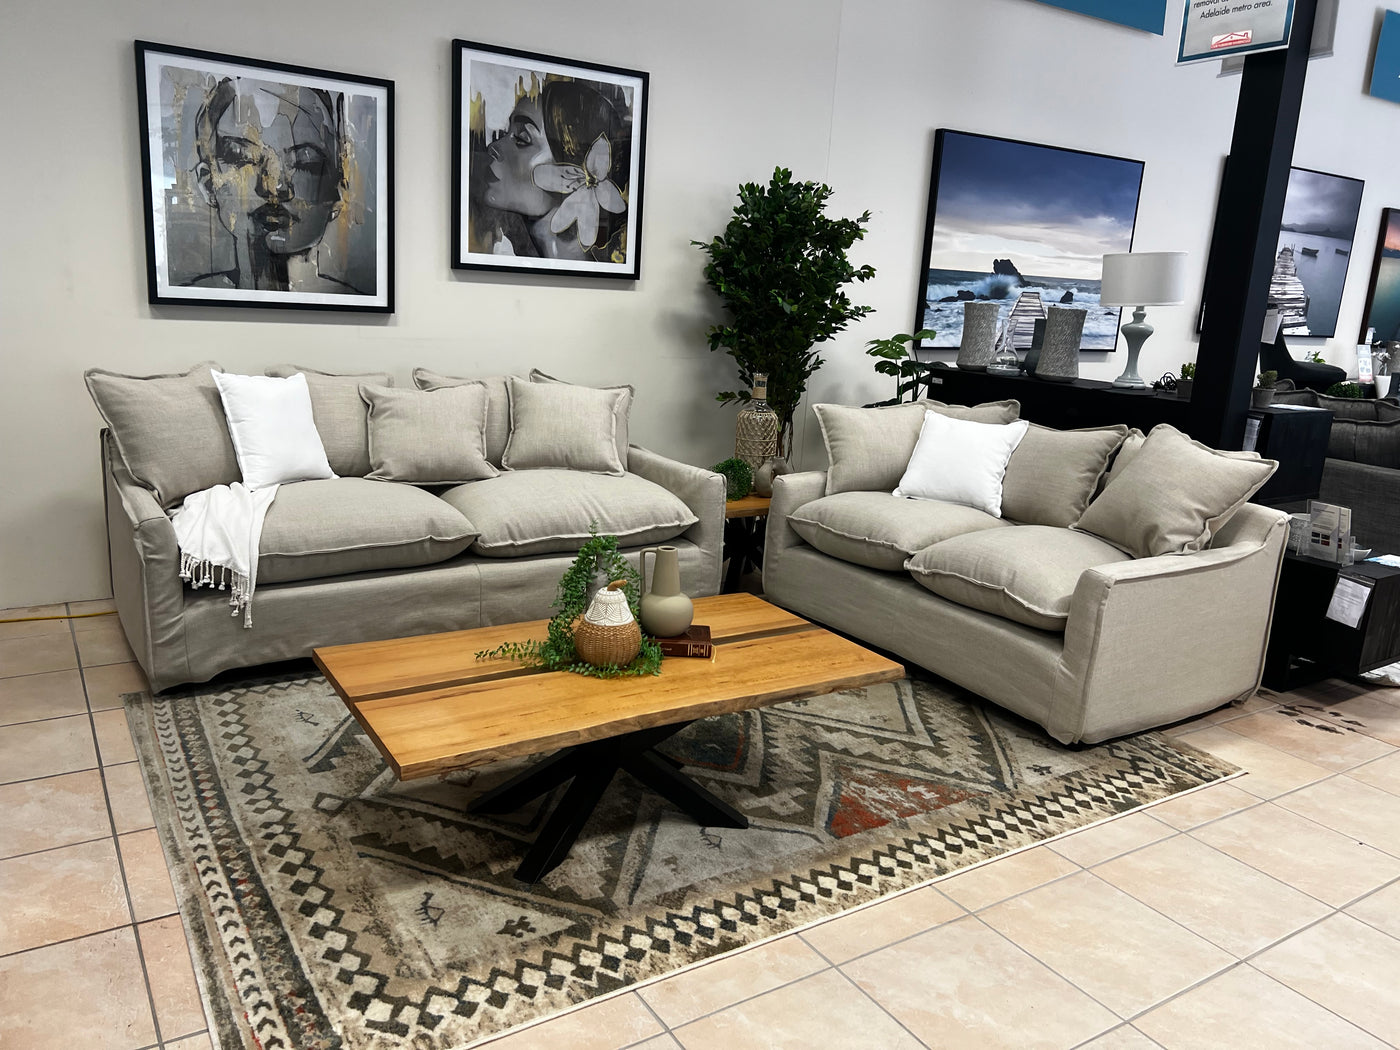 Shop Lounge at Our Furniture Warehouse | Our Furniture Warehouse